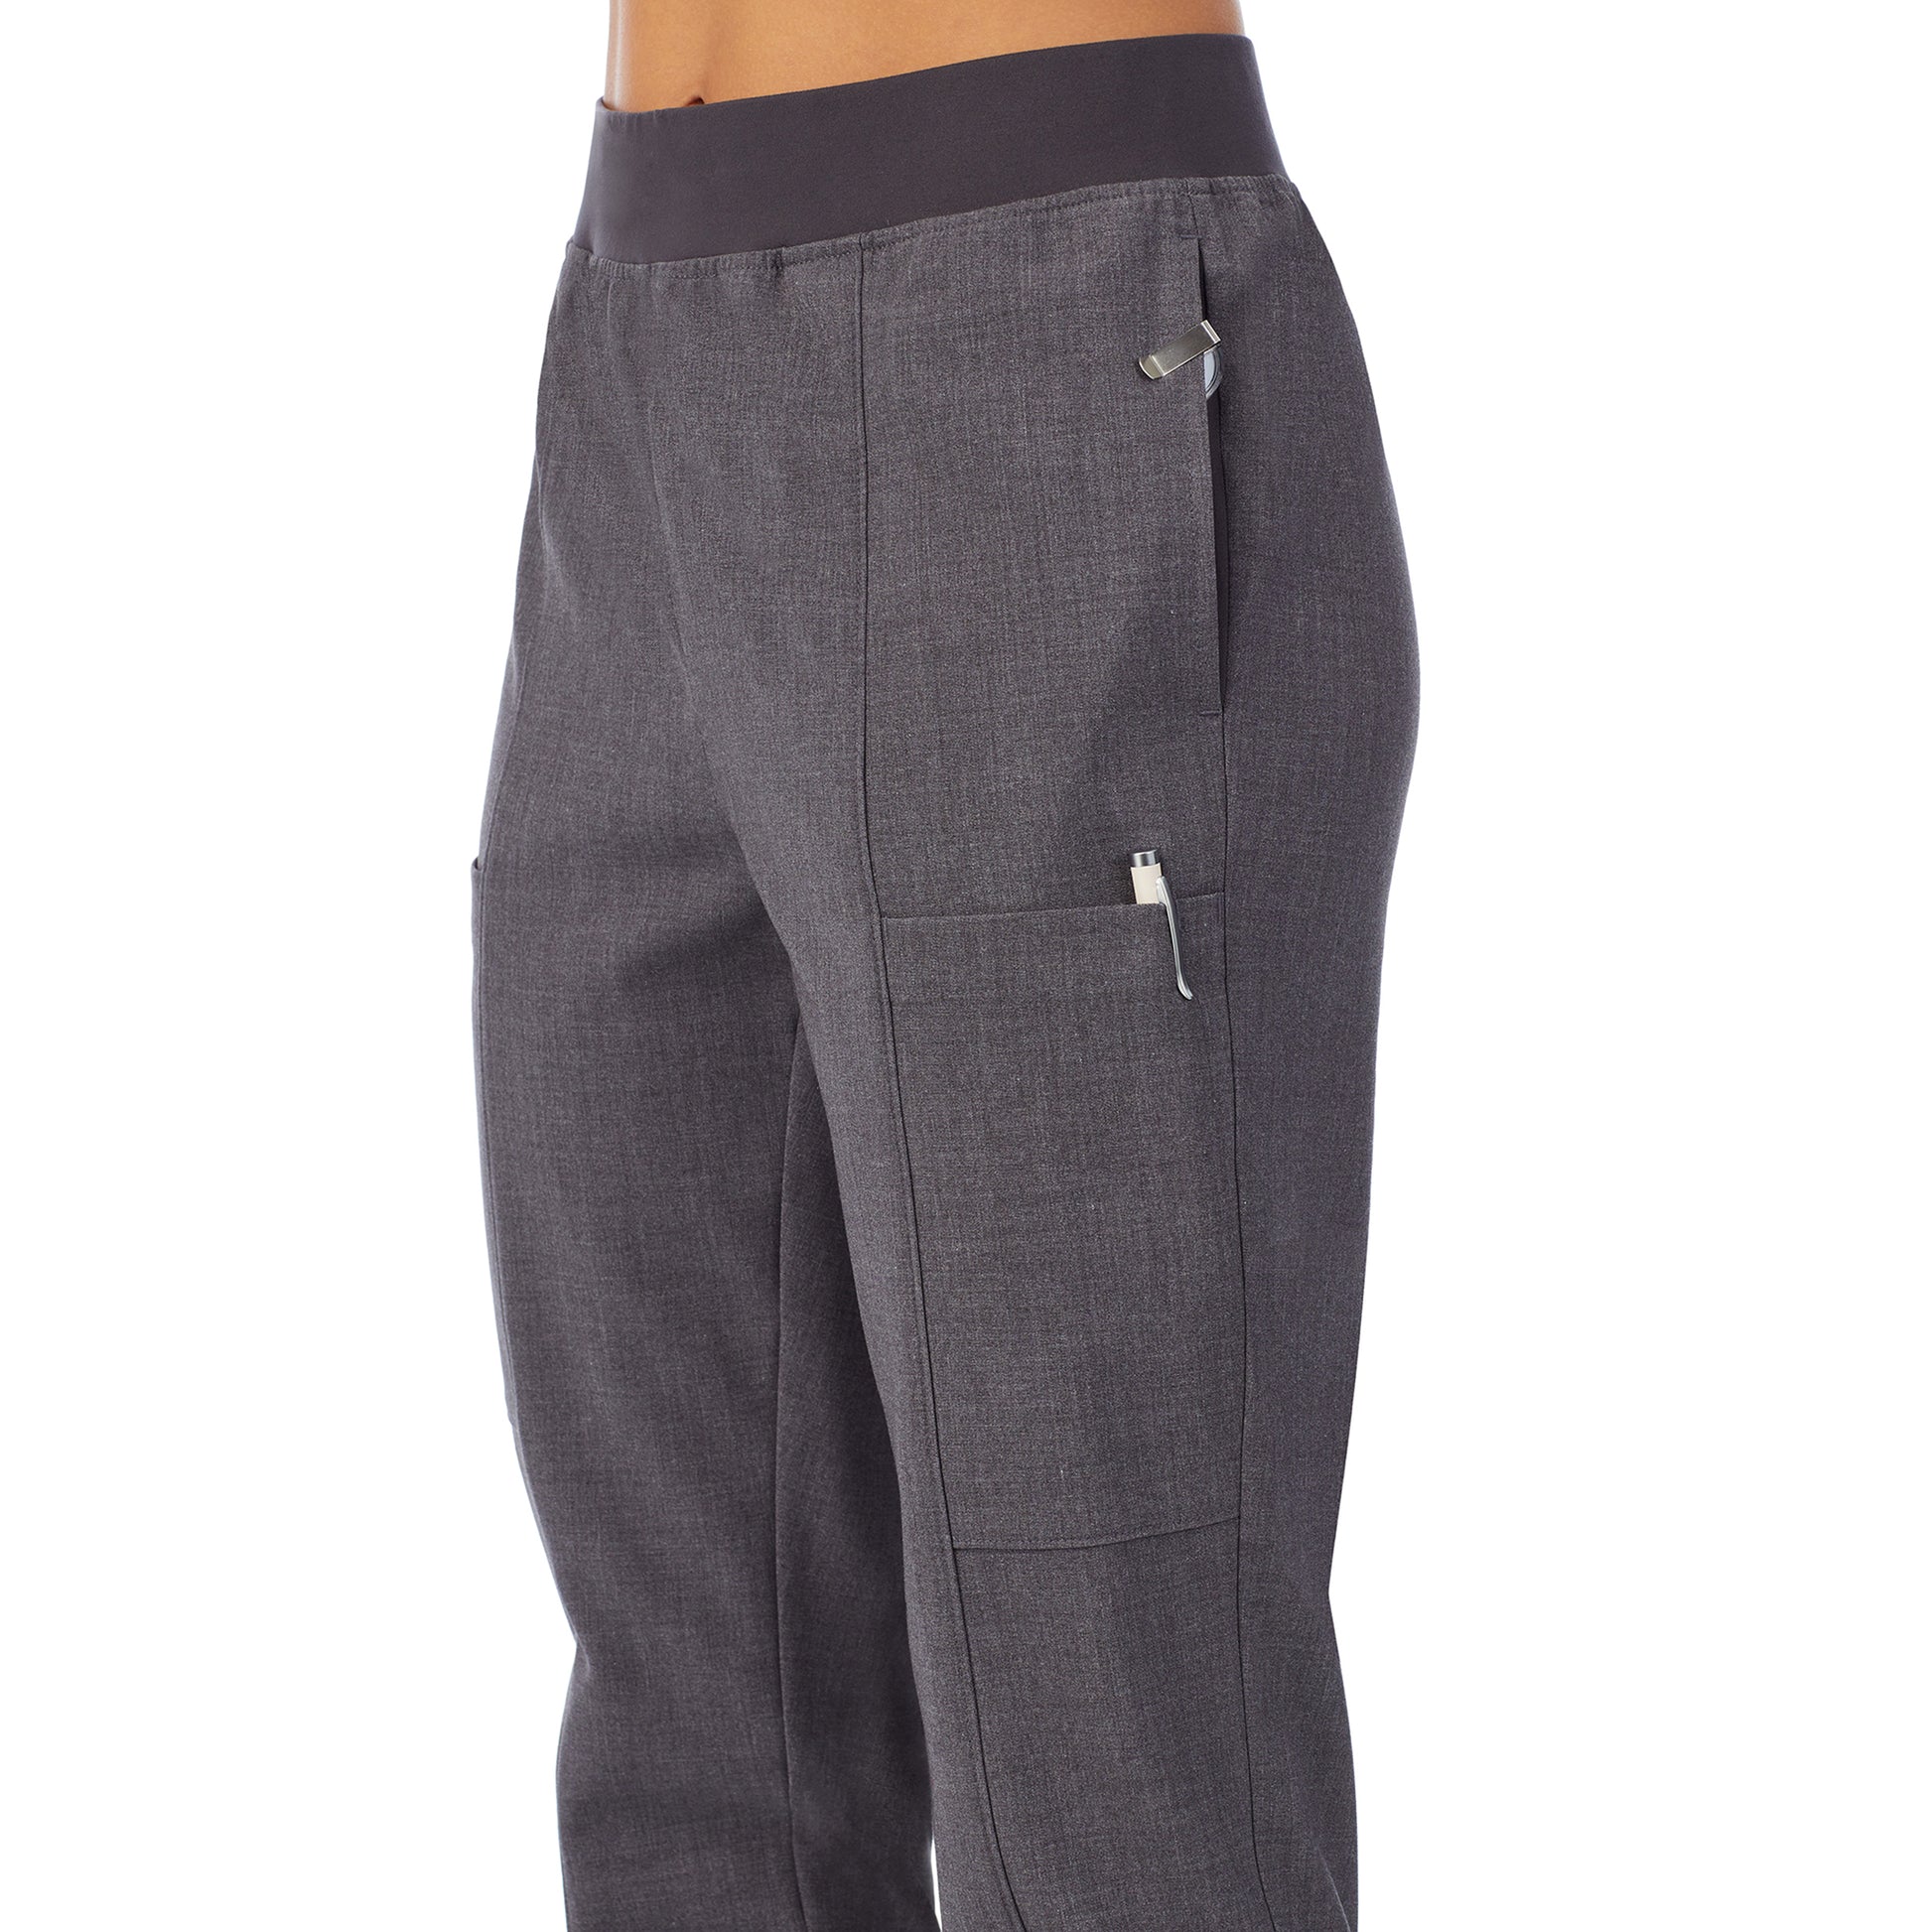 Charcoal Heather; Model is wearing size S. She is 5’9”, Bust 34”, Waist 25”, Hips 35”.@ Womens scrub slim grey cargo pant